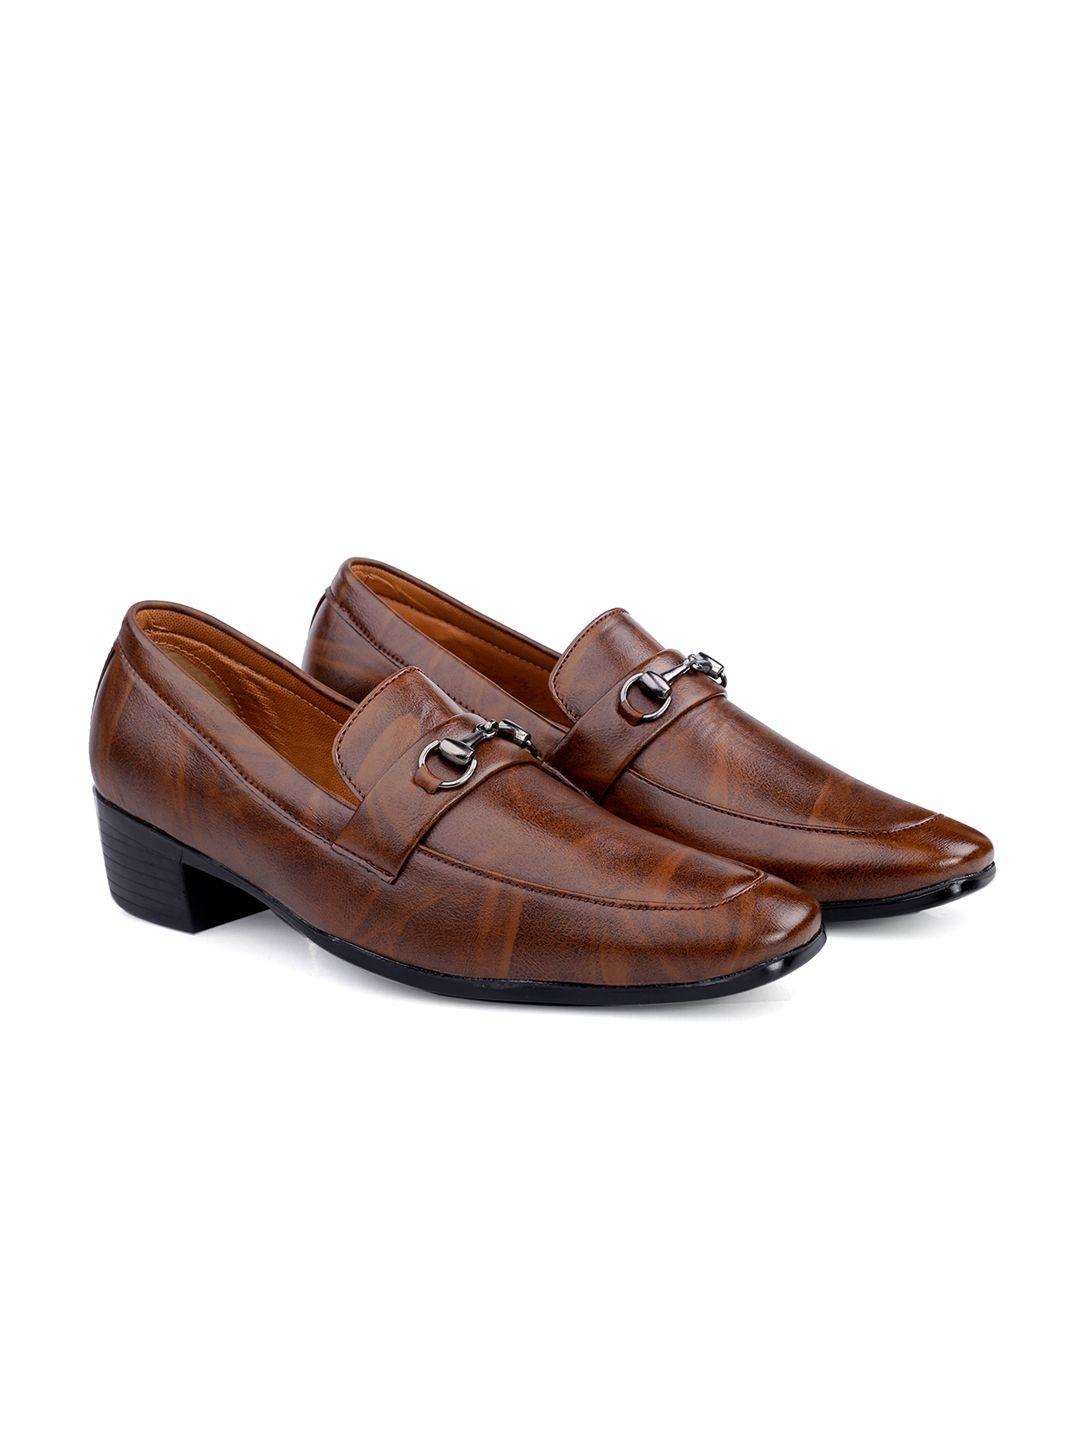 bxxy men pointed-toe height increasing formal loafers